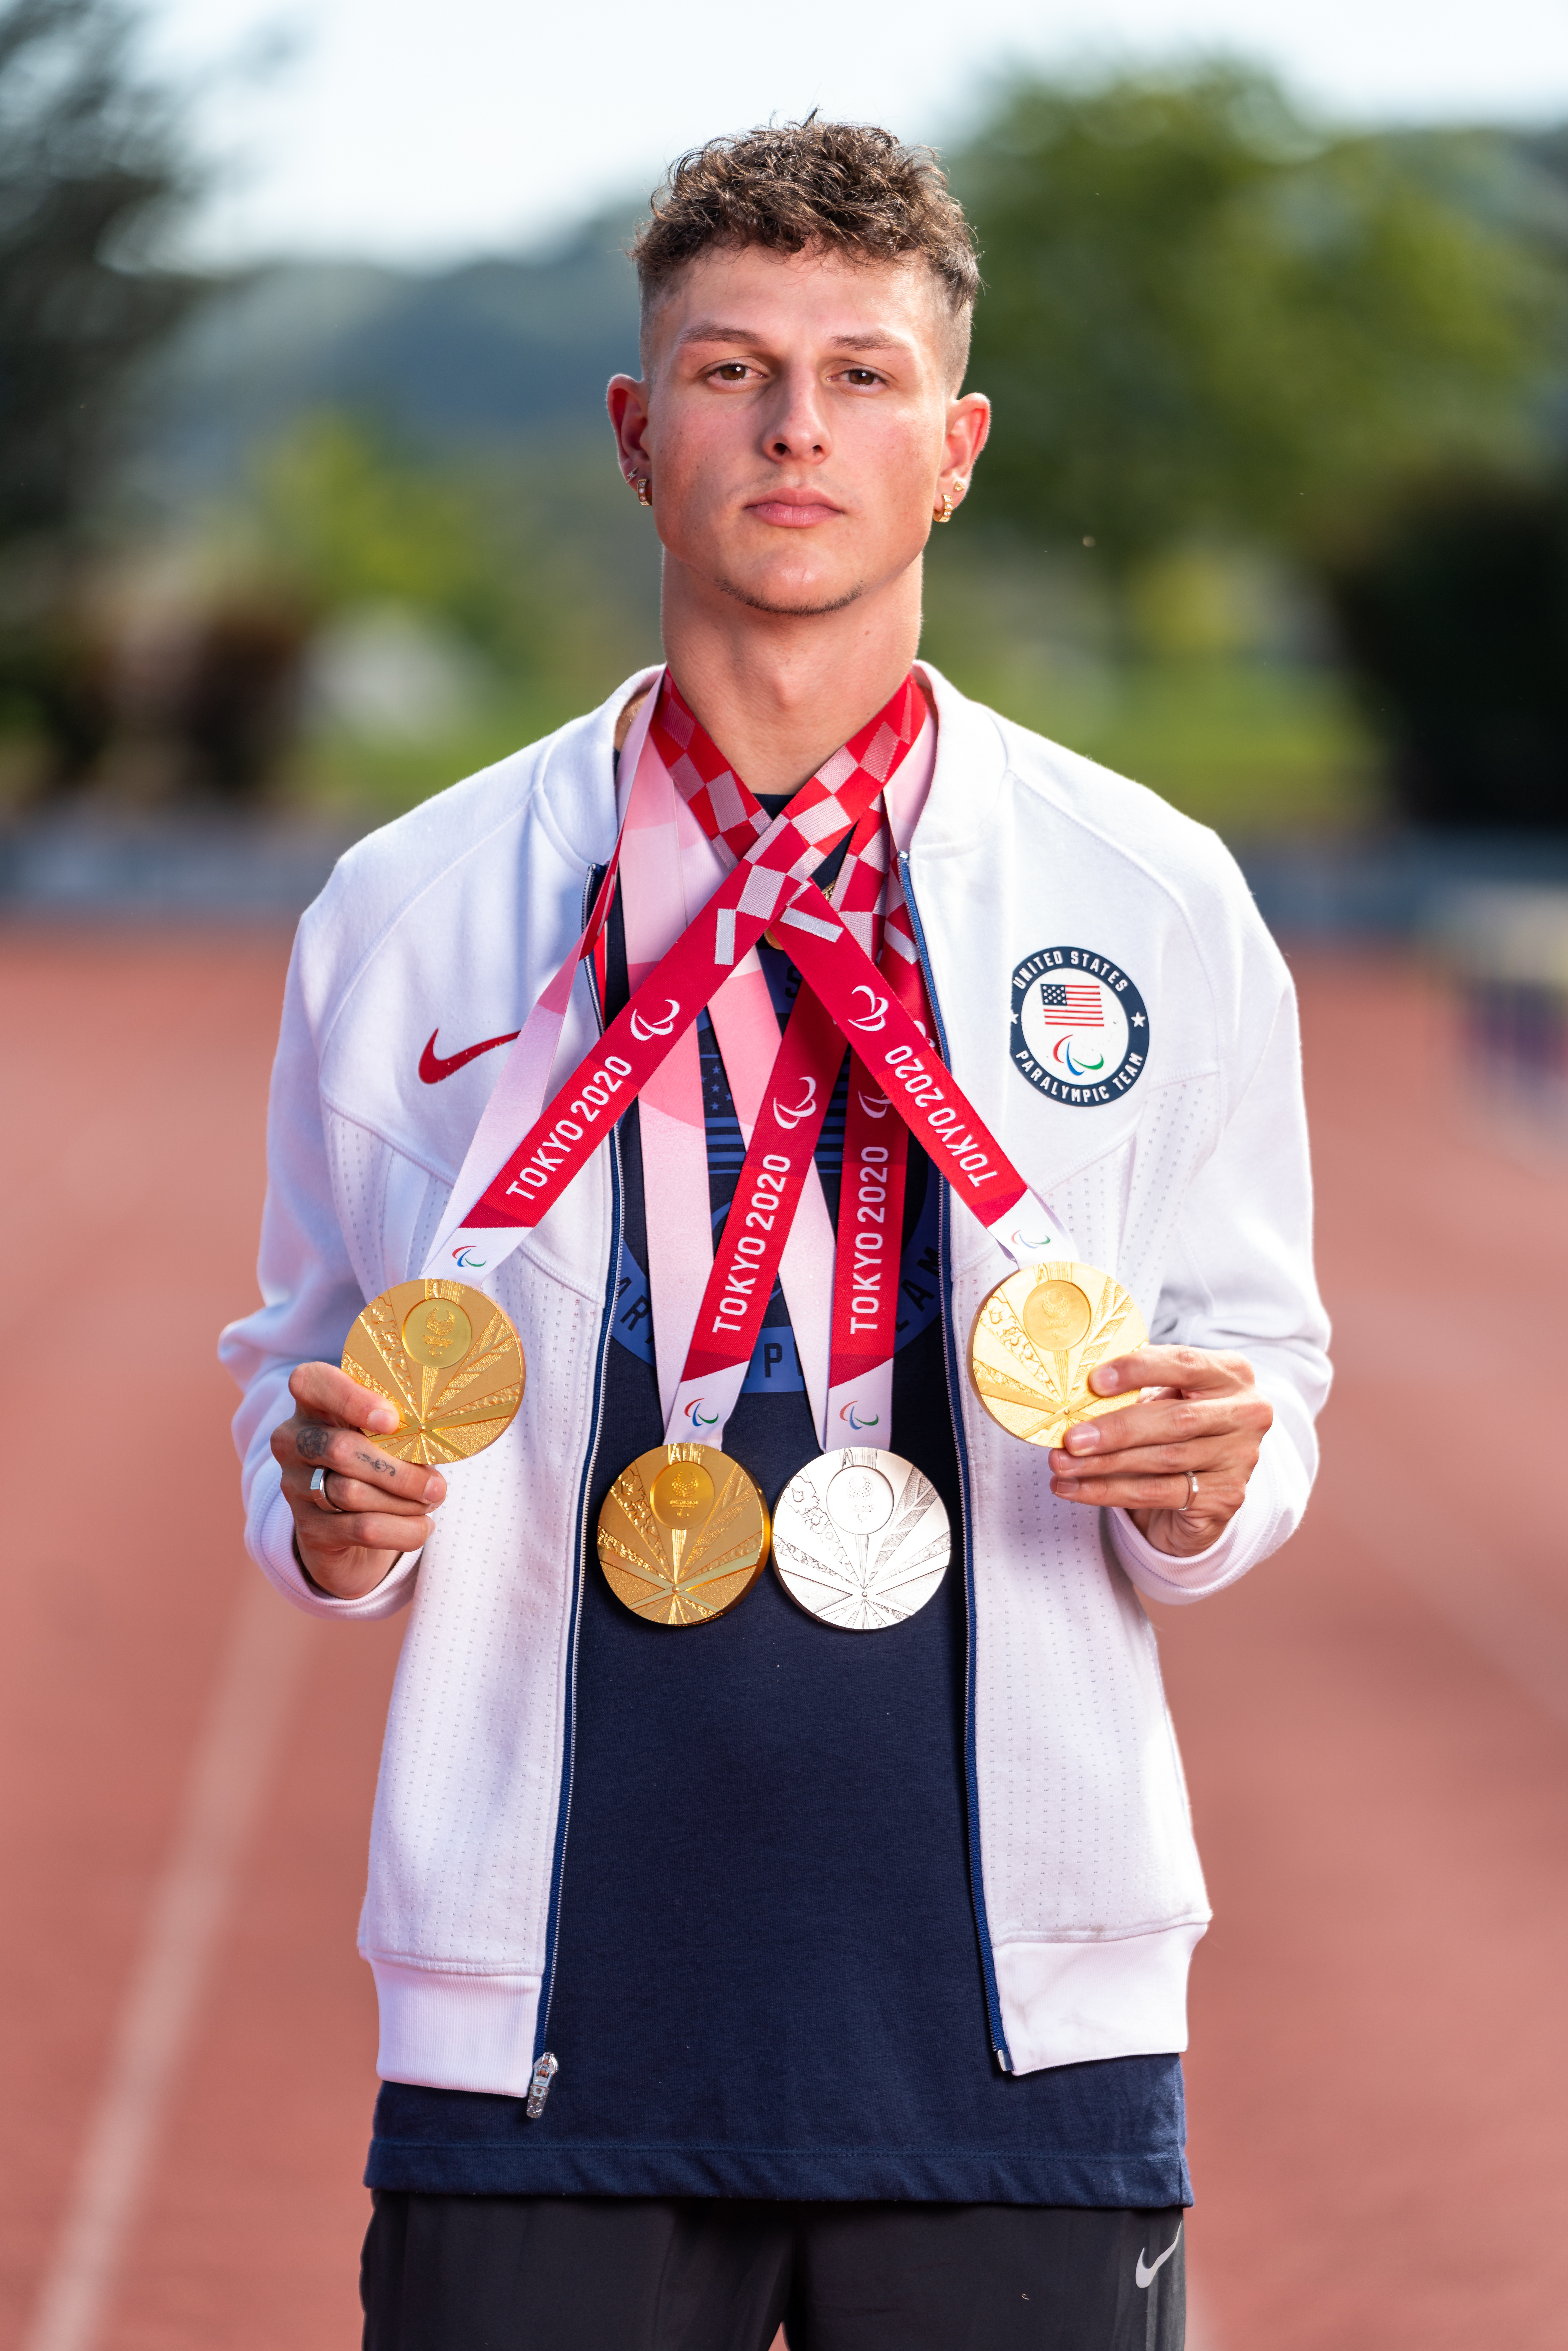 Nick Mayhugh wearing three gold medals and one silver medal